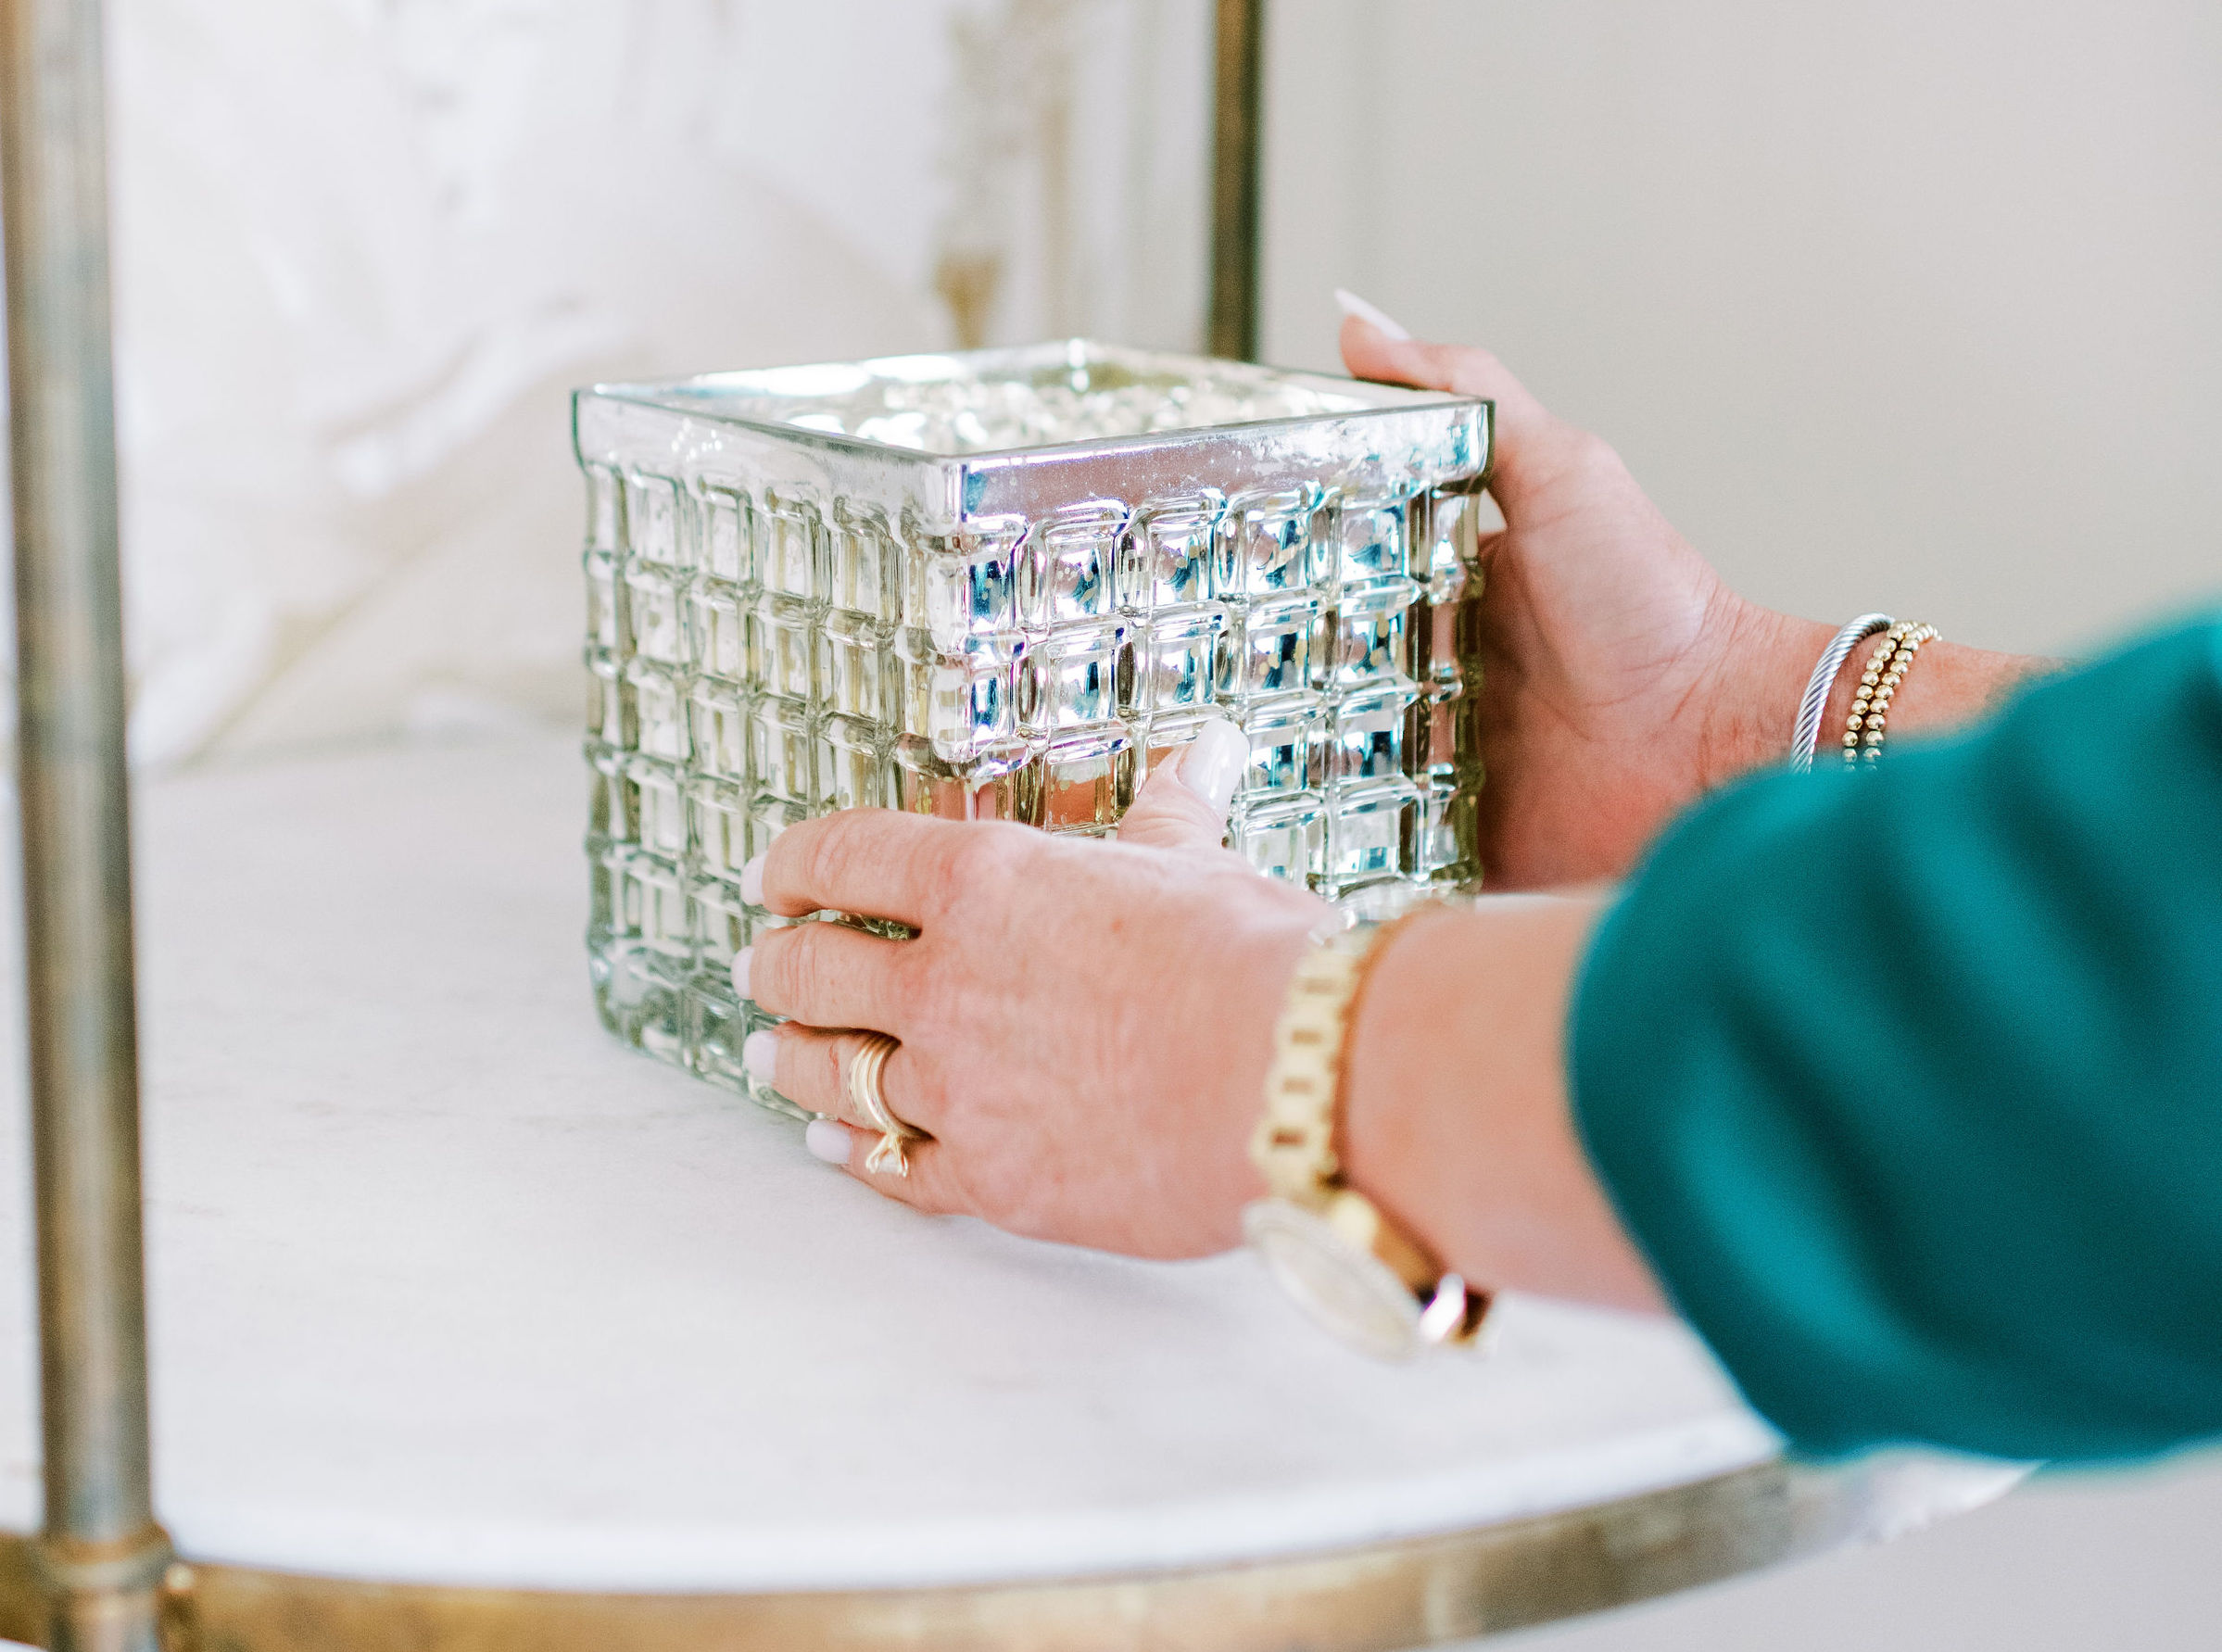 A woman's hand placing a silver metallic cube on a shelf